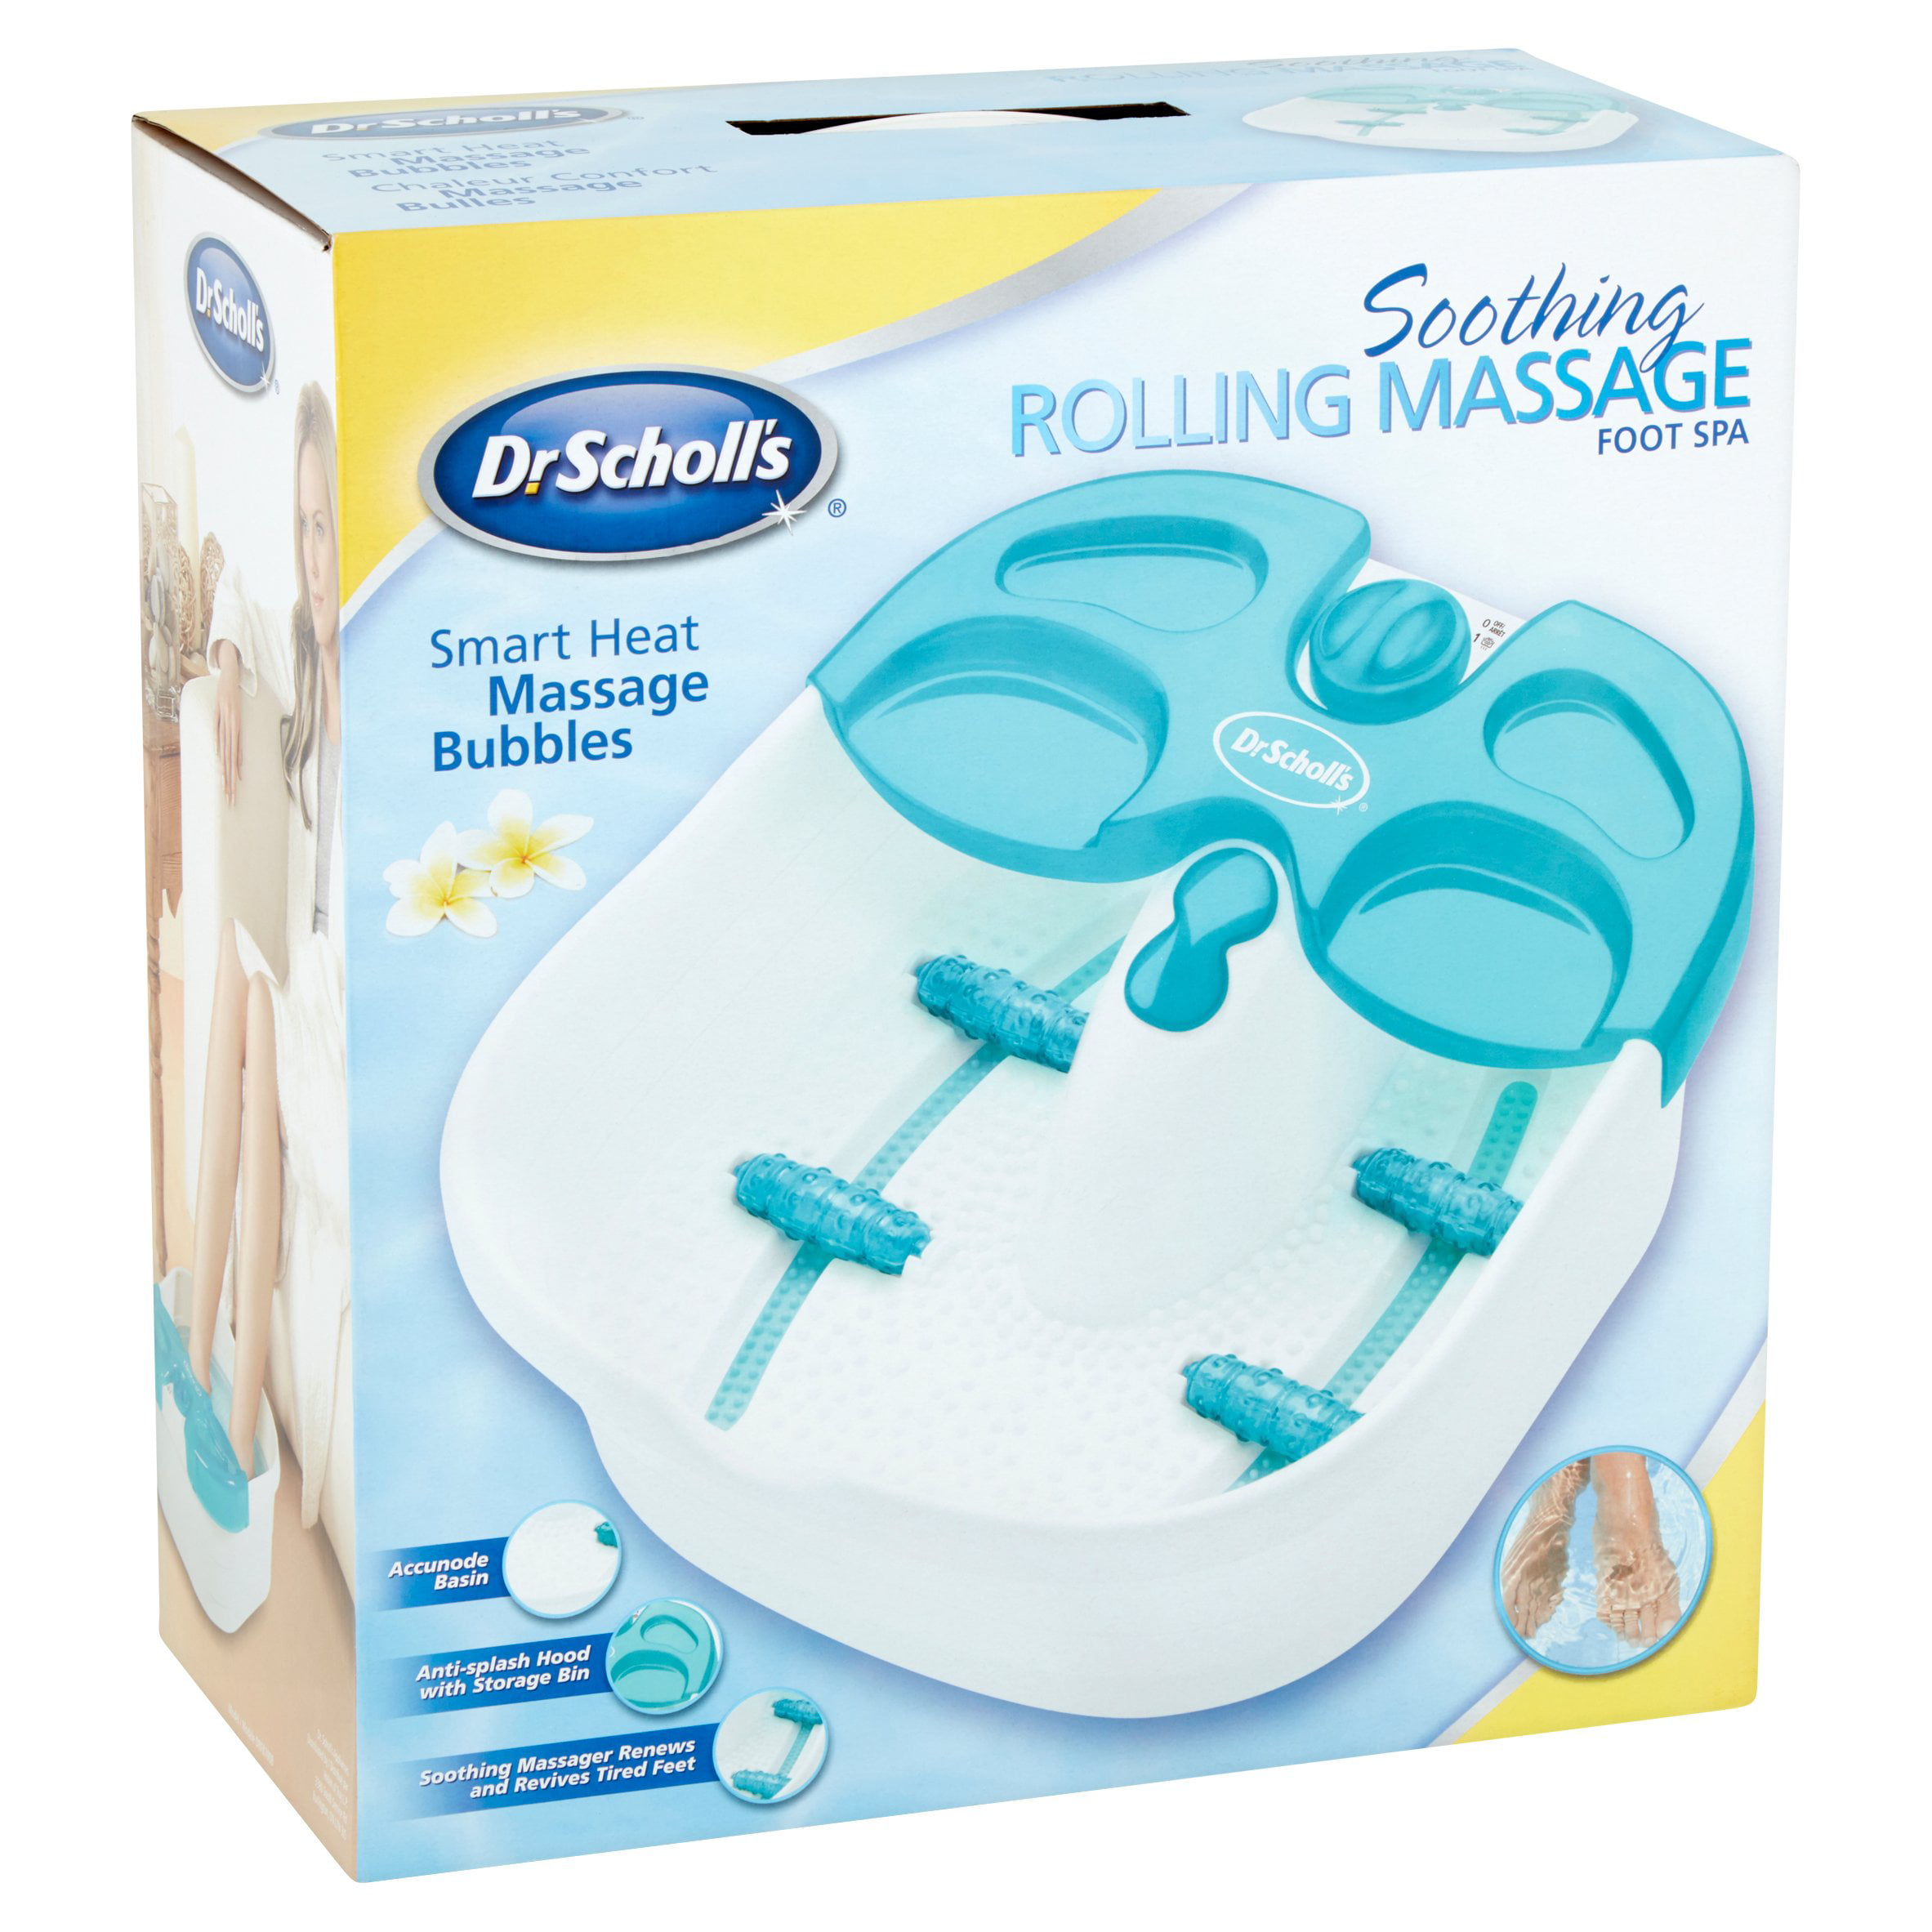 Dr Scholl's Soothing Rolling Massage 